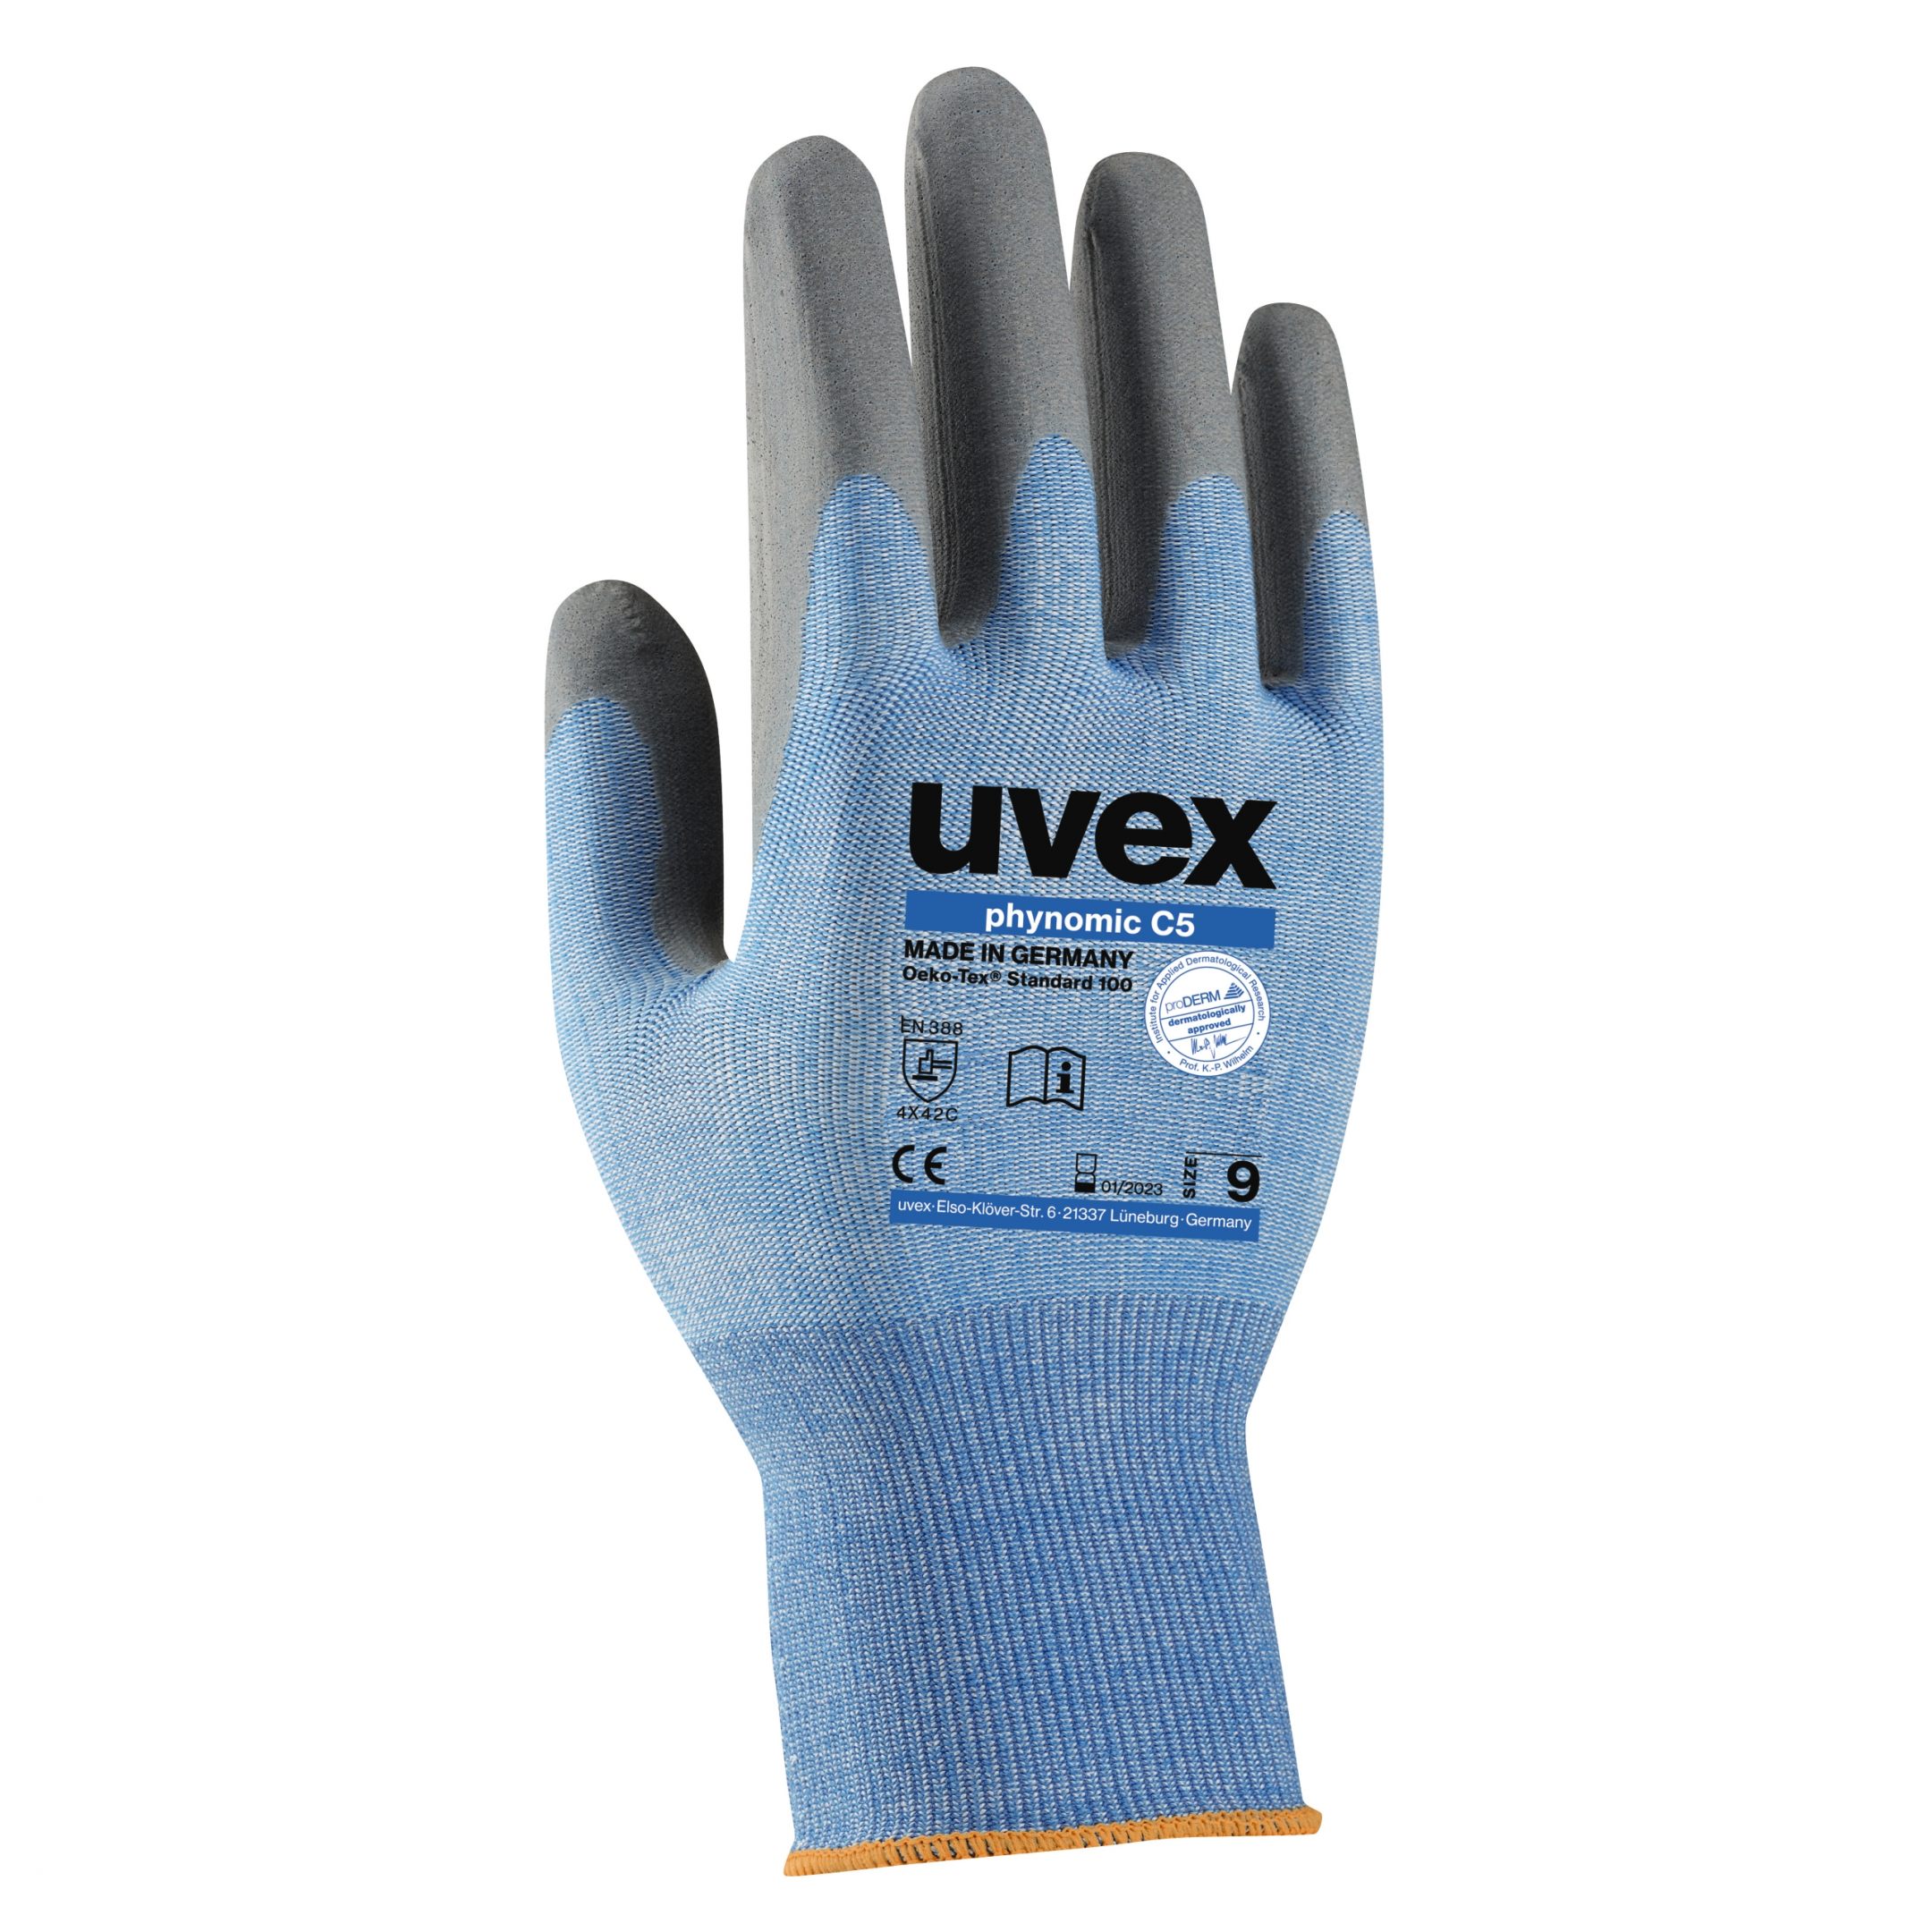 uvex Phynomic C5 Cut Protection Gloves - S